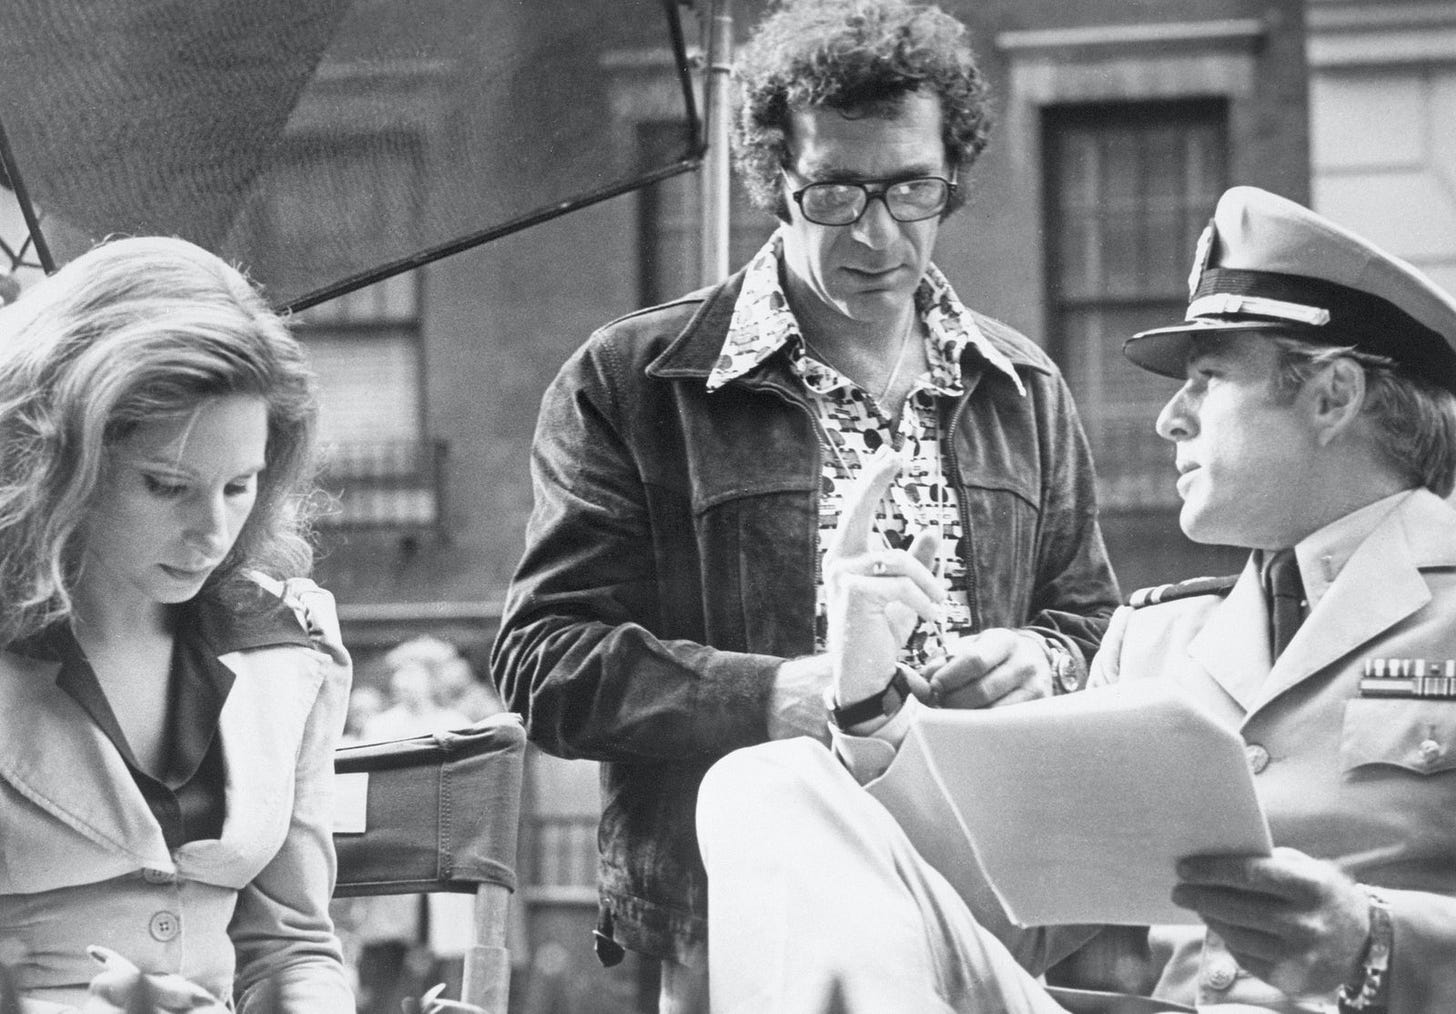 Director Sydney Pollack on set with his stars. “I adored Sydney” Streisand writes. “We used to tell each other secrets.”